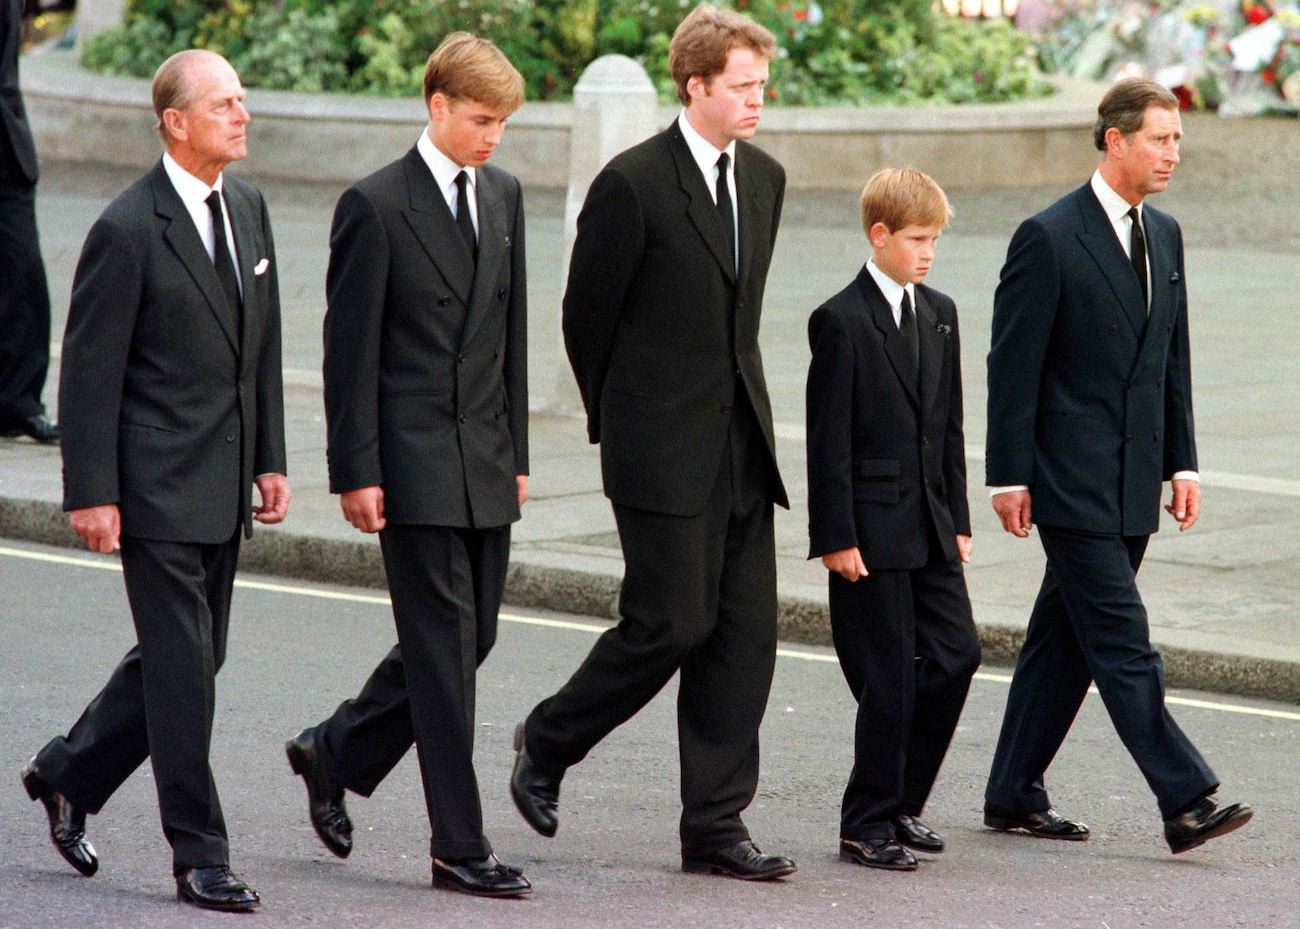 Prince Harry and family members walking at Princess Diana's funeral